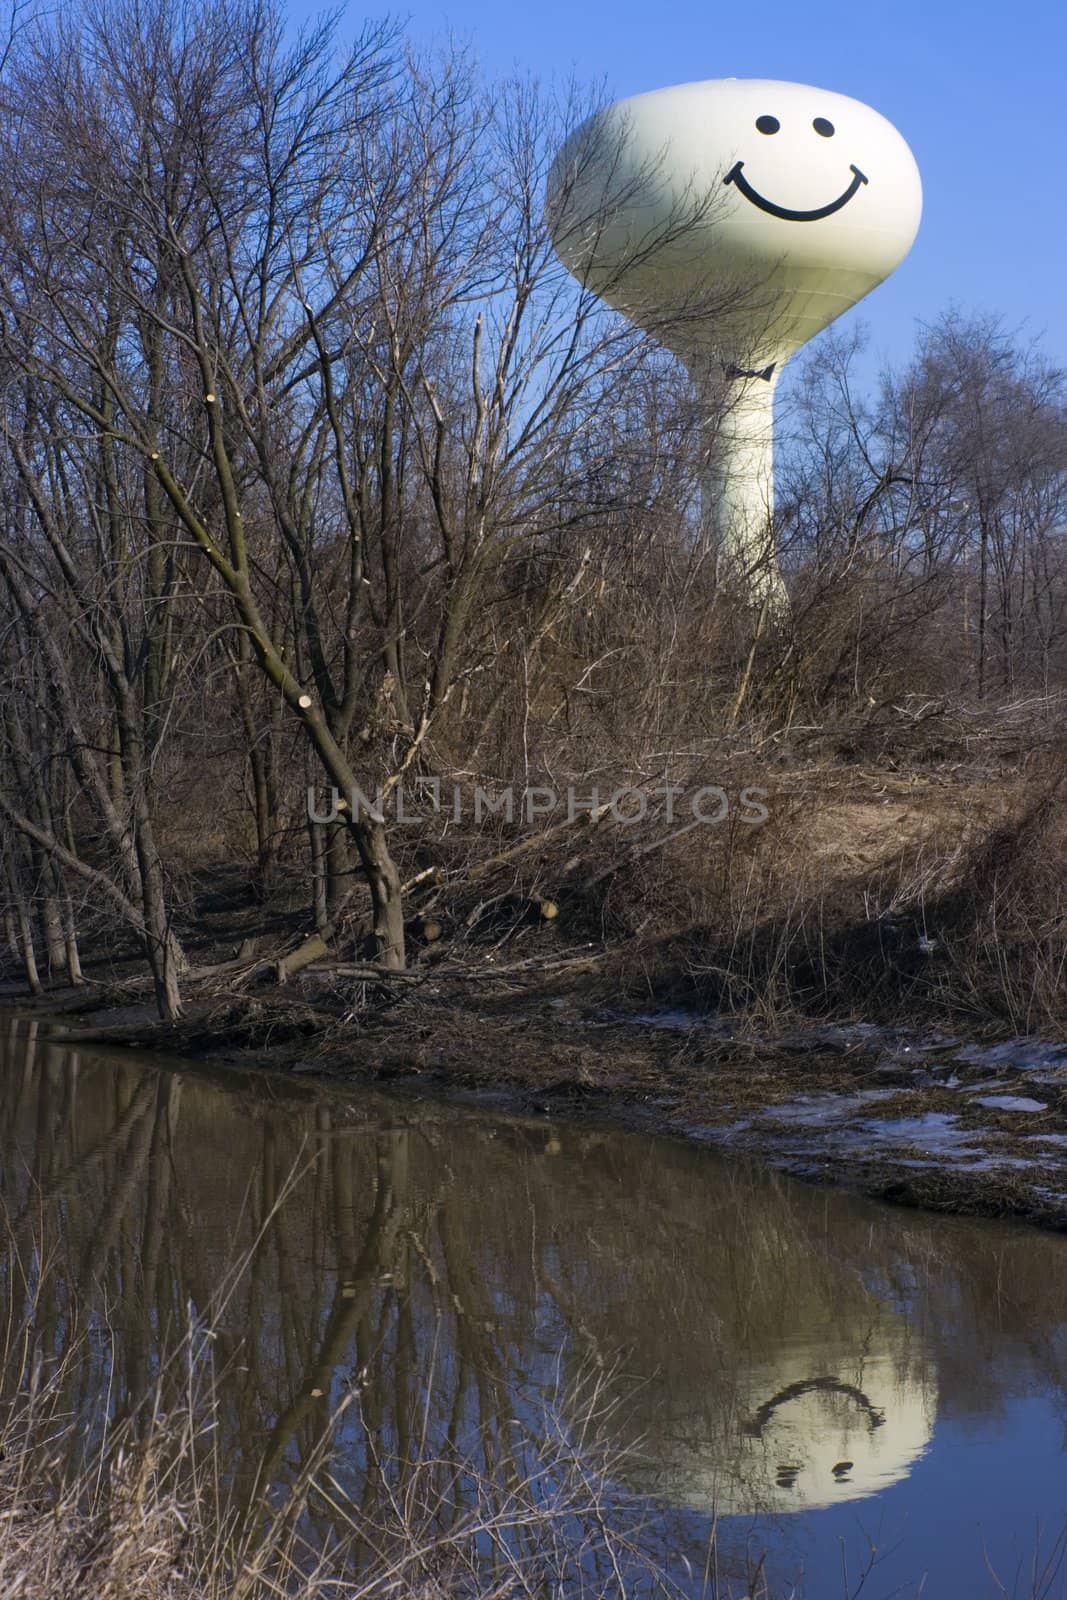 Smiling Water Tower reflected in river.